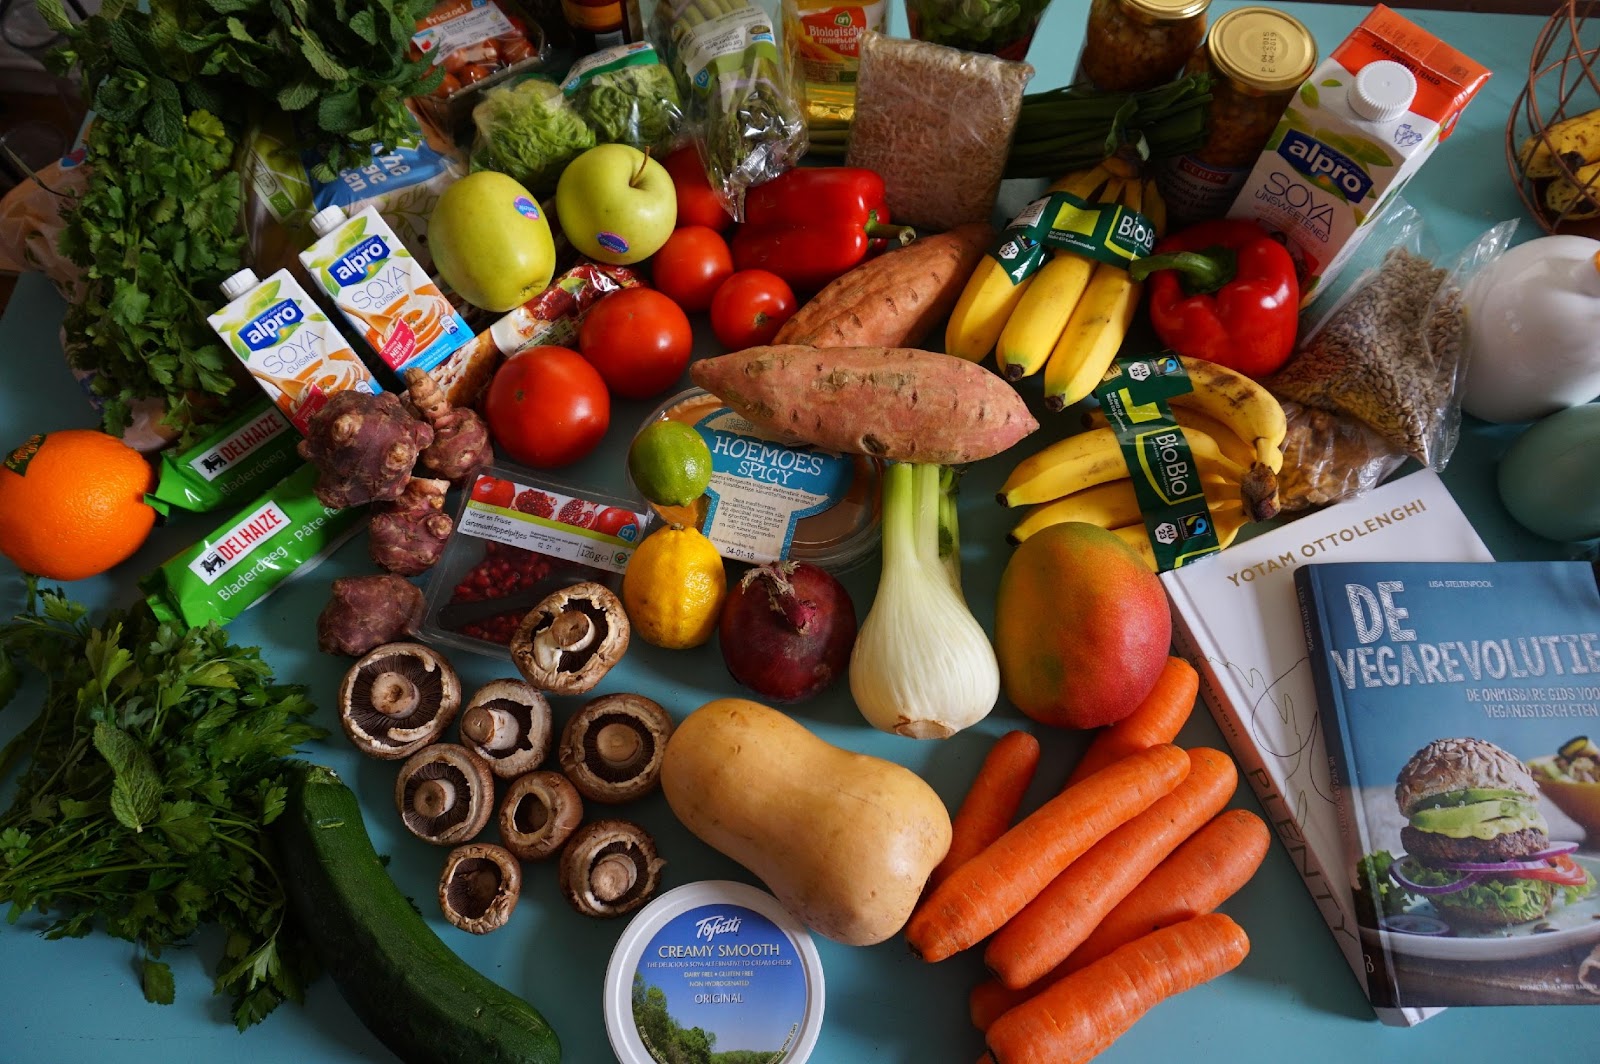 a table of carrots, apples, mushrooms, bananas, yams, plant-based milk, mango, bell peppers and apples